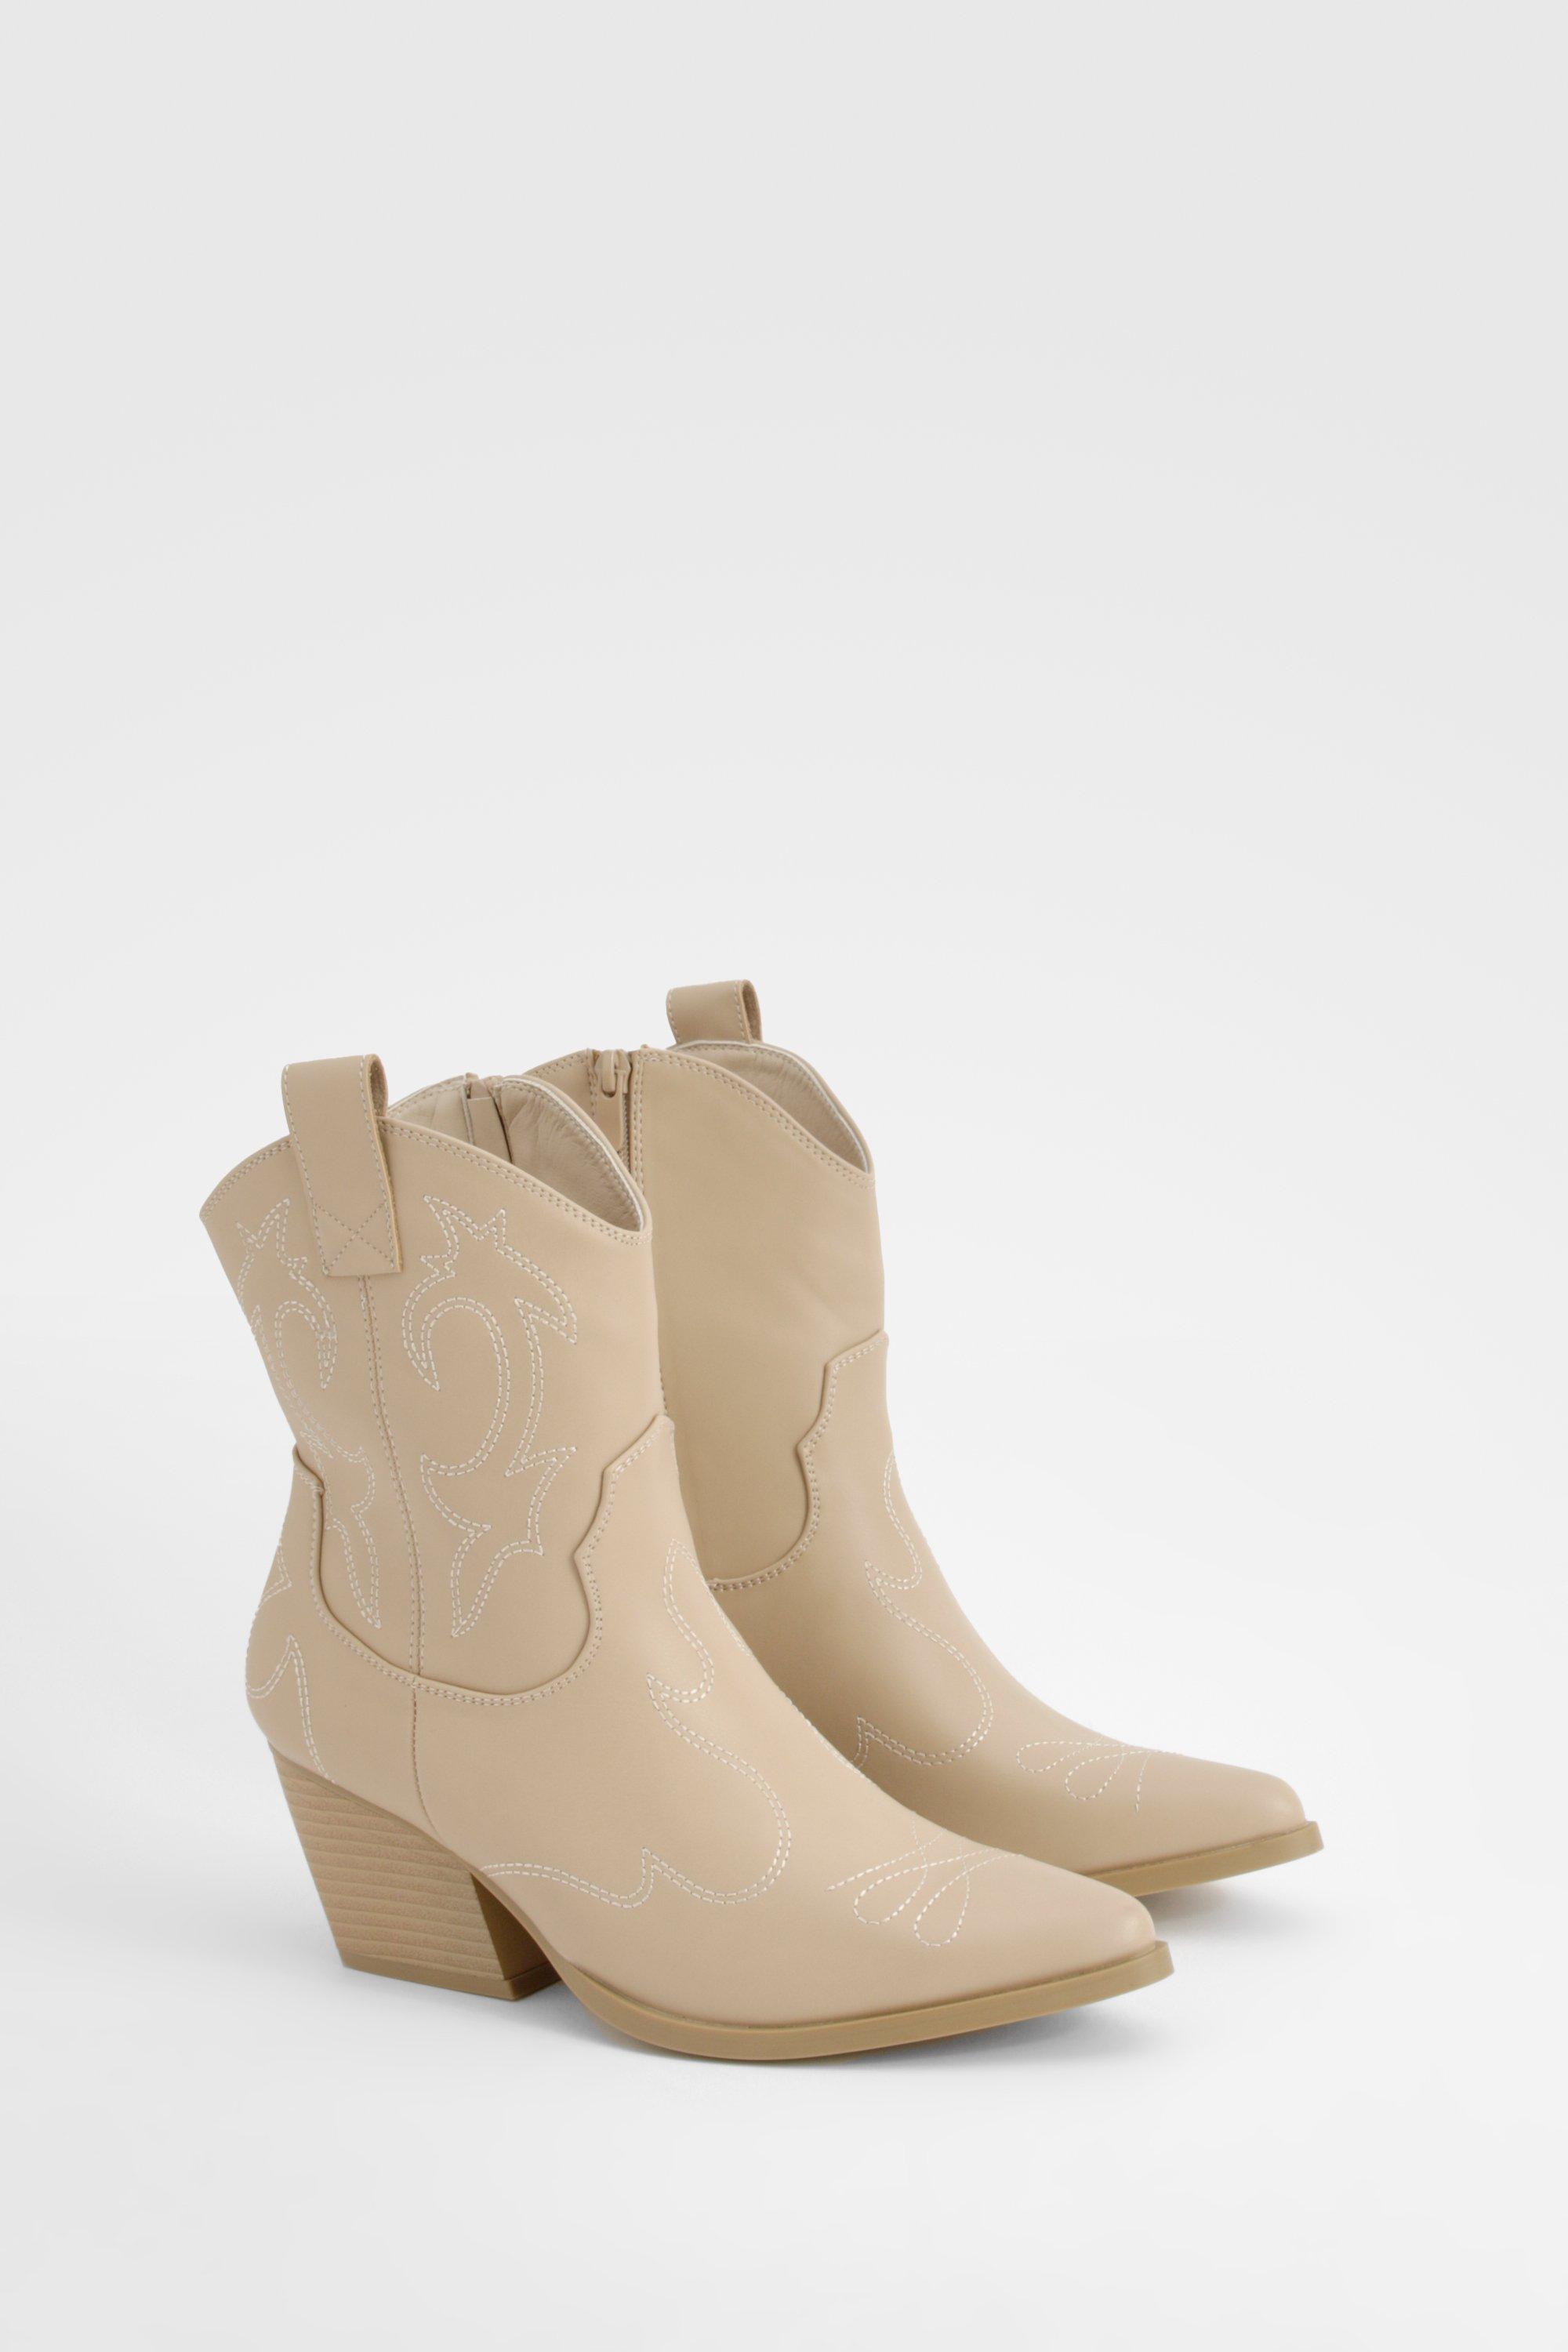 Image of Stitch Detail Western Ankle Boots, Beige